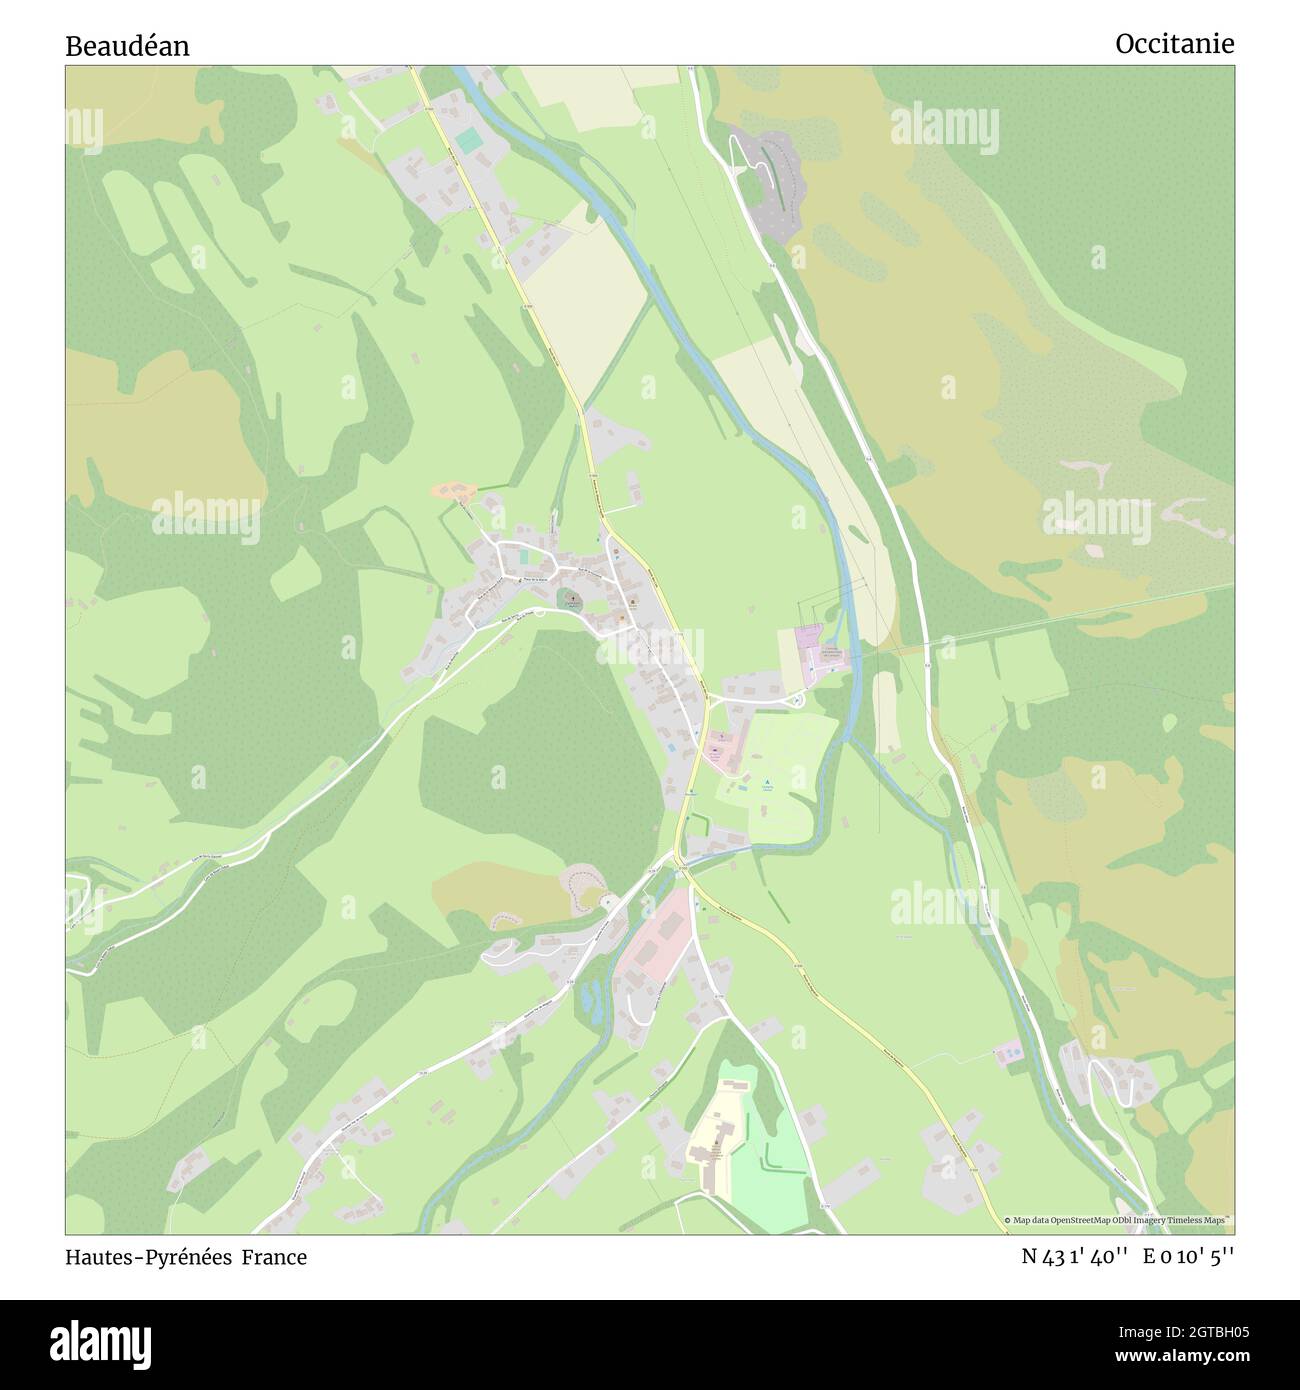 Beaudéan, Hautes-Pyrénées, France, Occitanie, N 43 1' 40'', E 0 10' 5'', map, Timeless Map published in 2021. Travelers, explorers and adventurers like Florence Nightingale, David Livingstone, Ernest Shackleton, Lewis and Clark and Sherlock Holmes relied on maps to plan travels to the world's most remote corners, Timeless Maps is mapping most locations on the globe, showing the achievement of great dreams Stock Photo